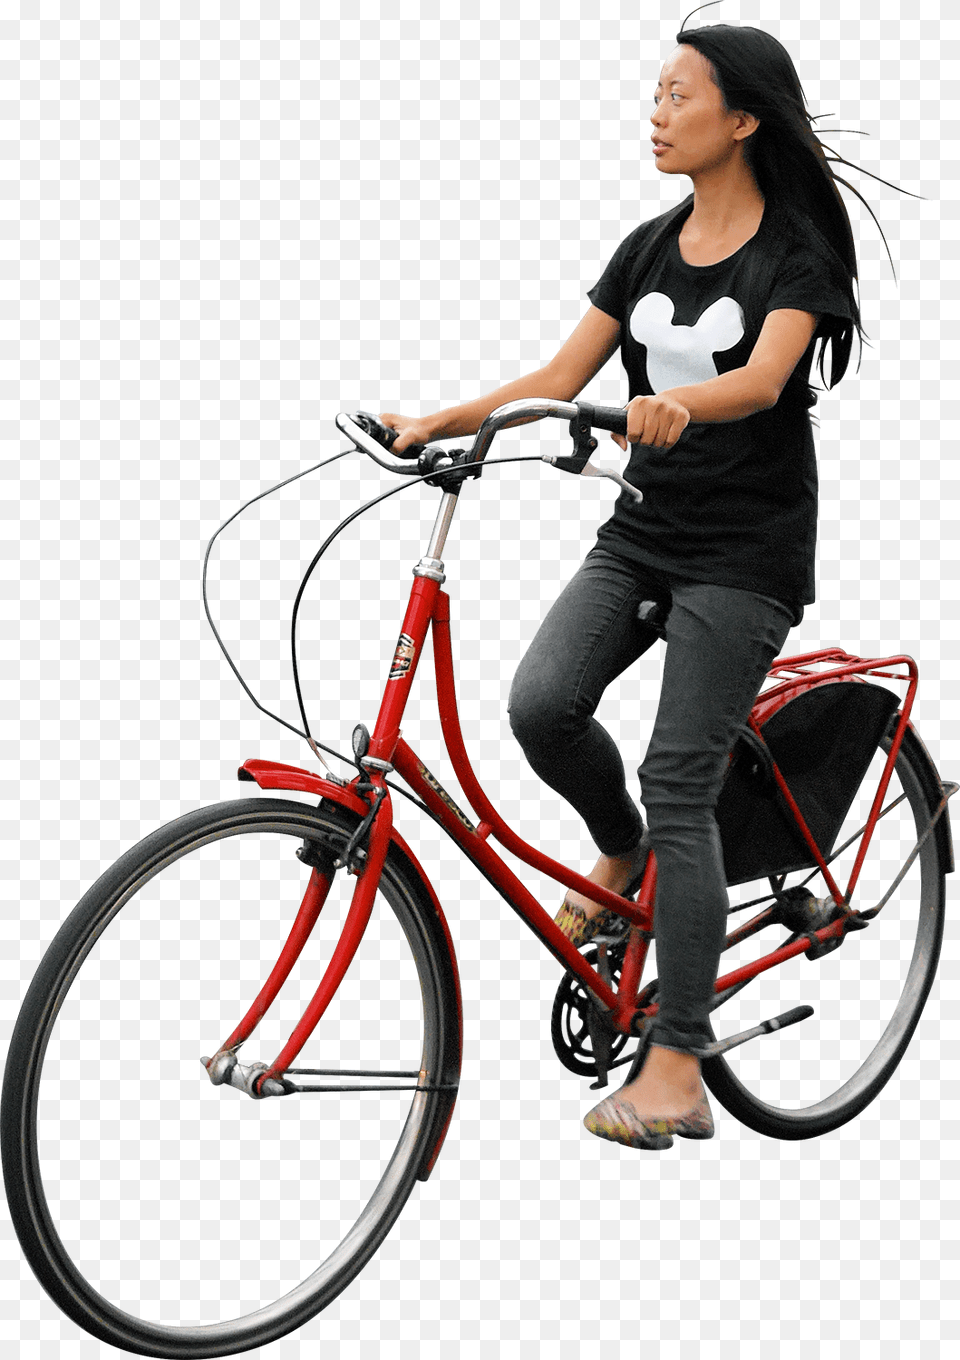 Cycling, Bicycle, Vehicle, Transportation, Adult Png